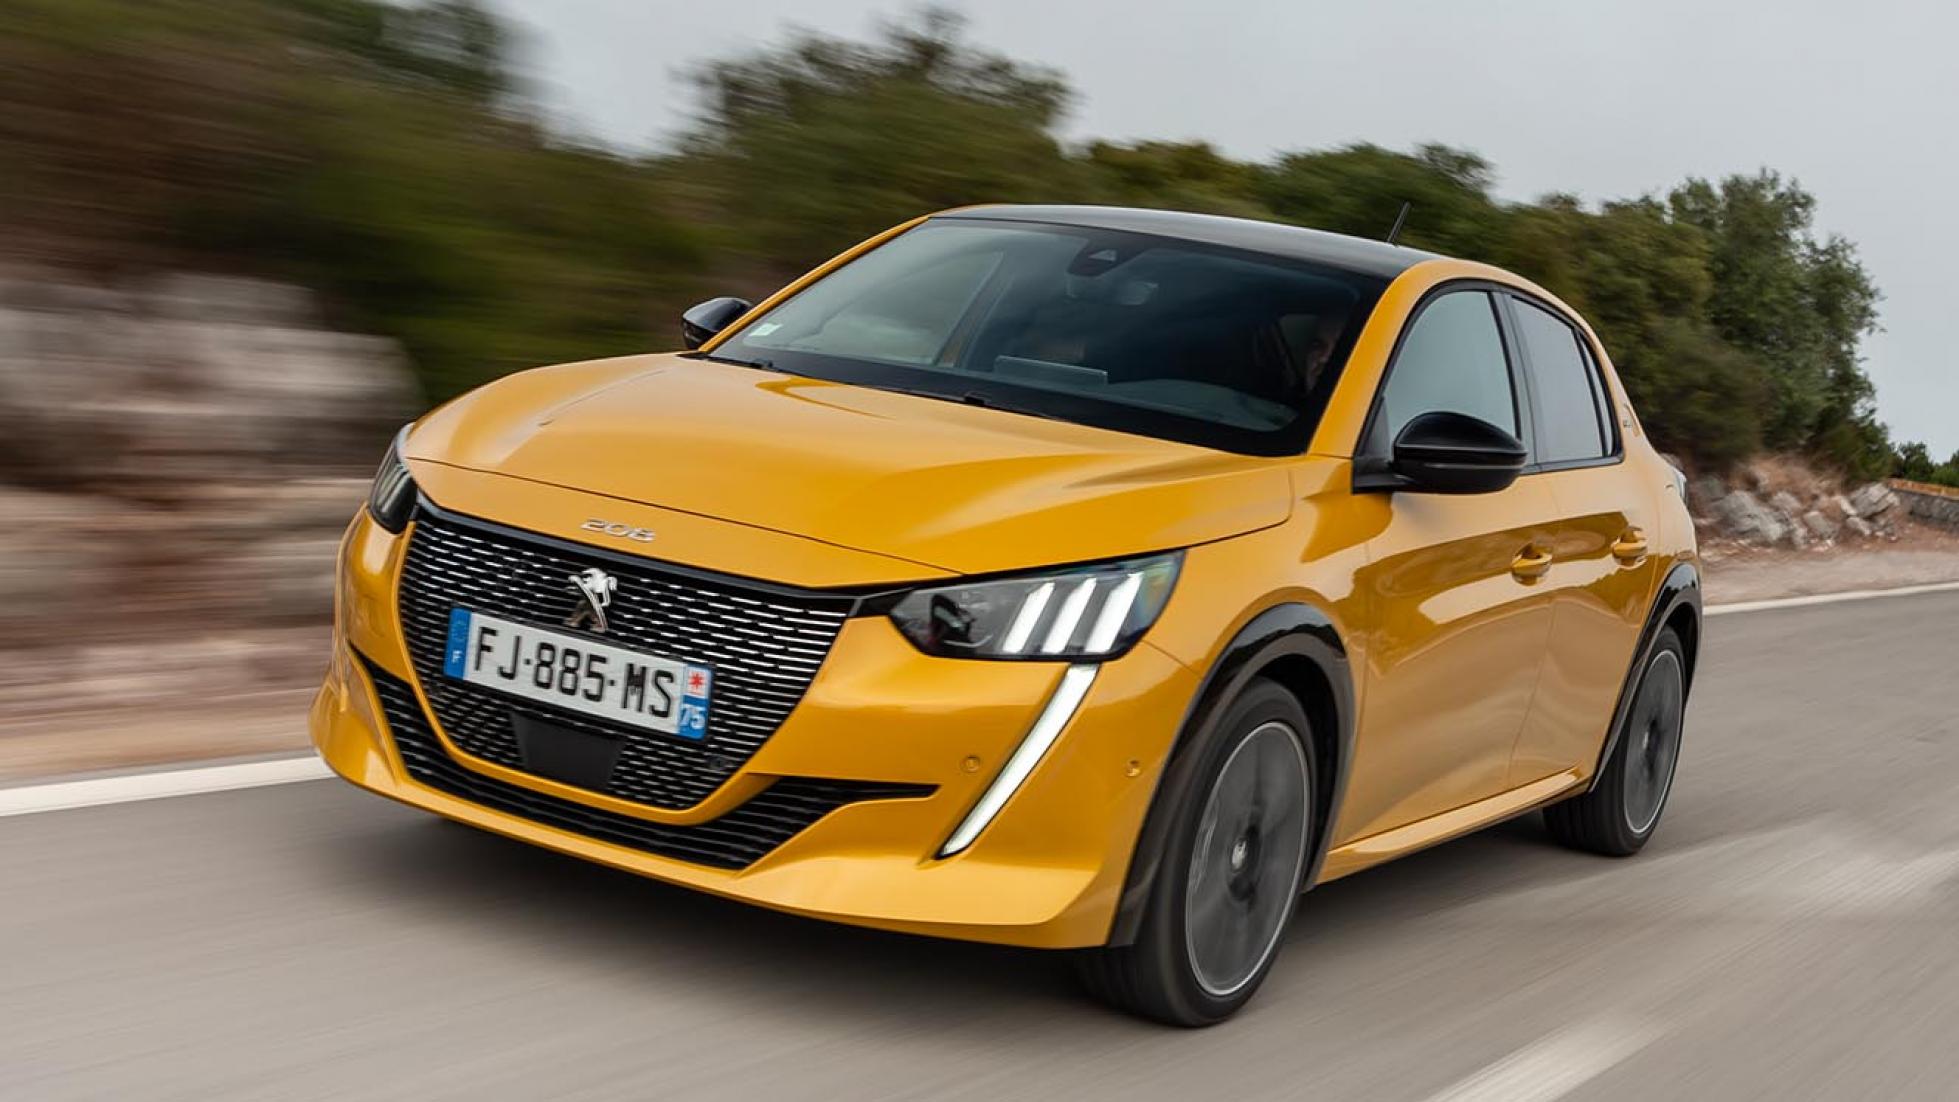 Peugeot 208 Review: ICE and EV supermini tested